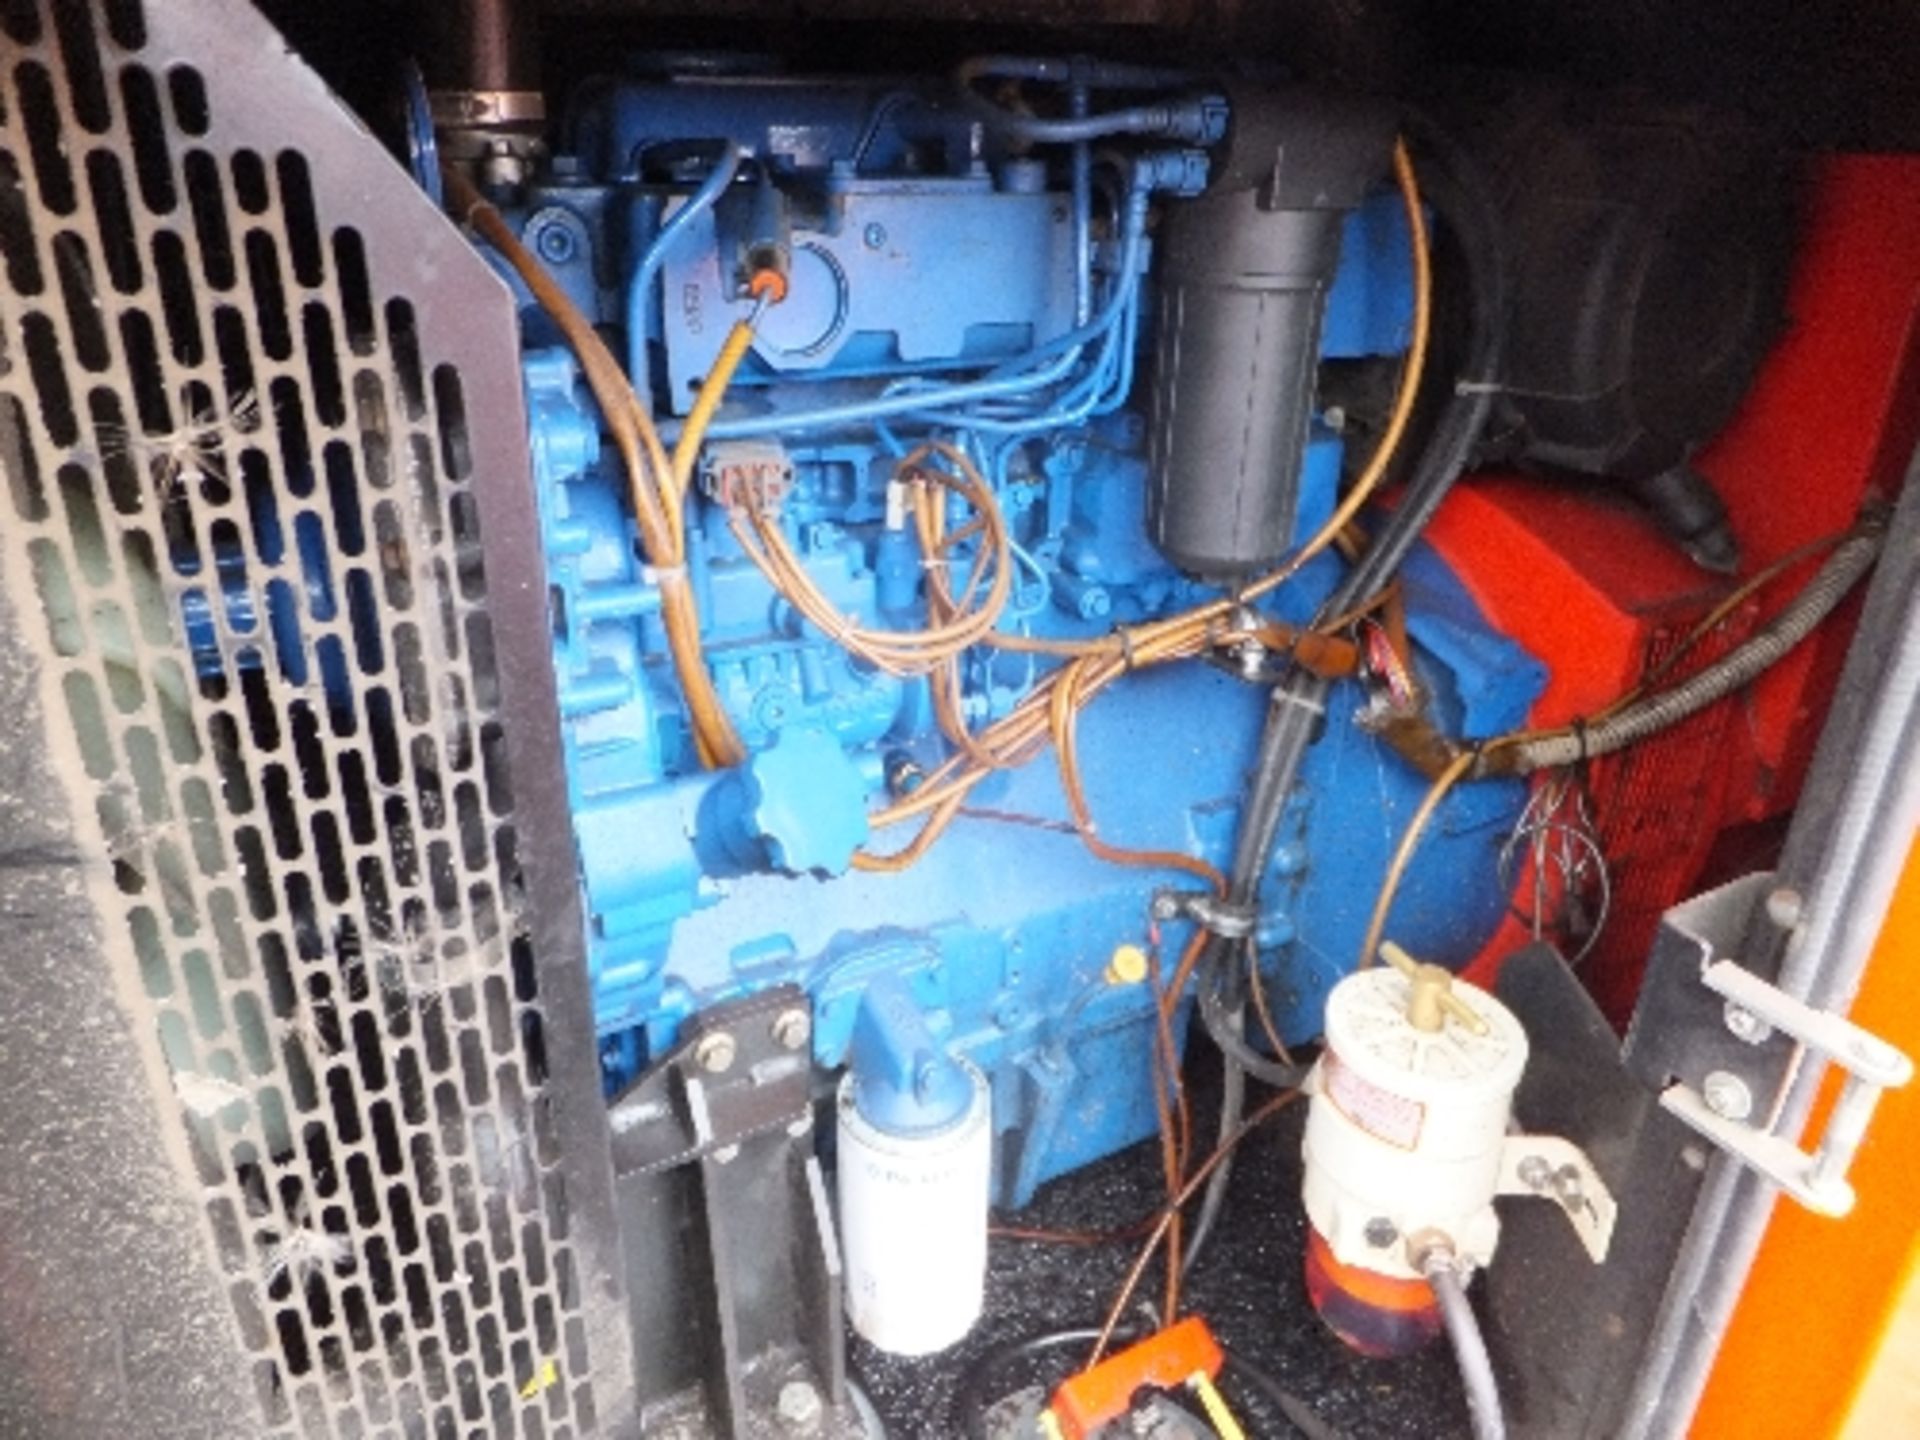 Genset MG115SS-P 100kva generator
Complete - parts of panel missing
HF6109 - Image 4 of 4